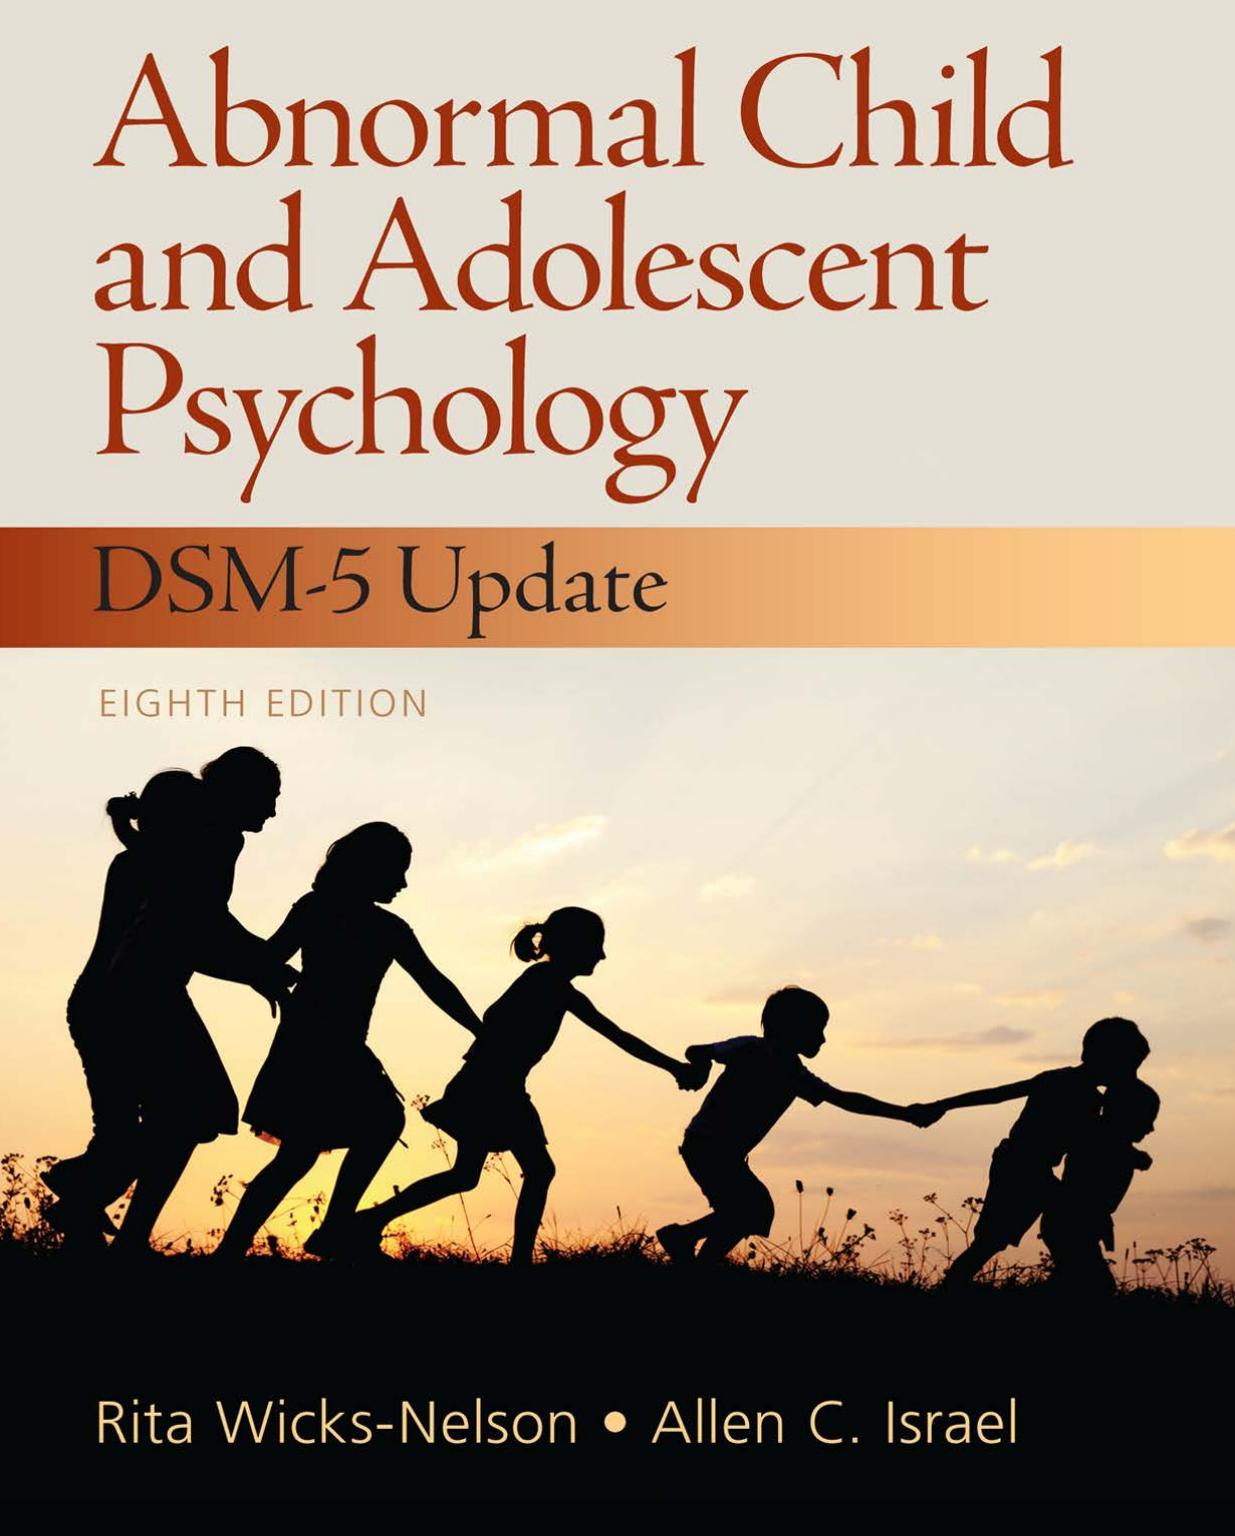 (eBook PDF)Abnormal Child and Adolescent Psychology 8th Edition by Rita Wicks-Nelson